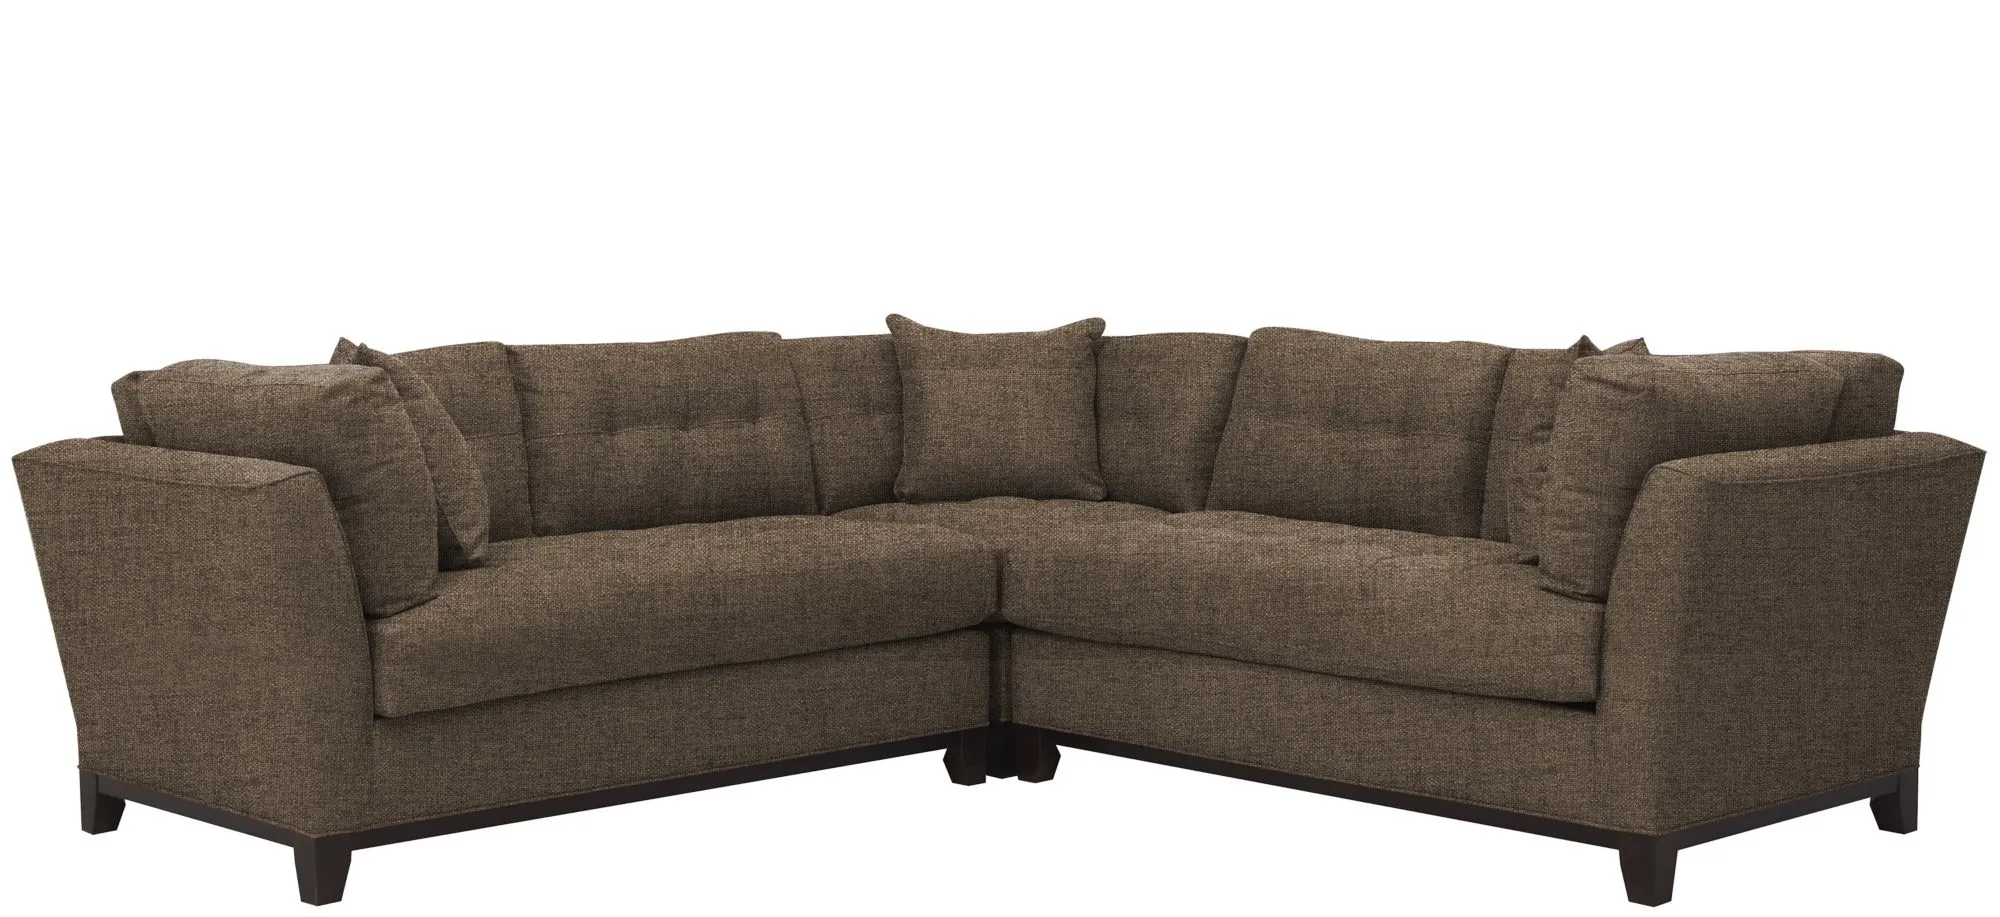 Cityscape 3-pc. Symmetrical Sectional in Santa Rosa Taupe by H.M. Richards